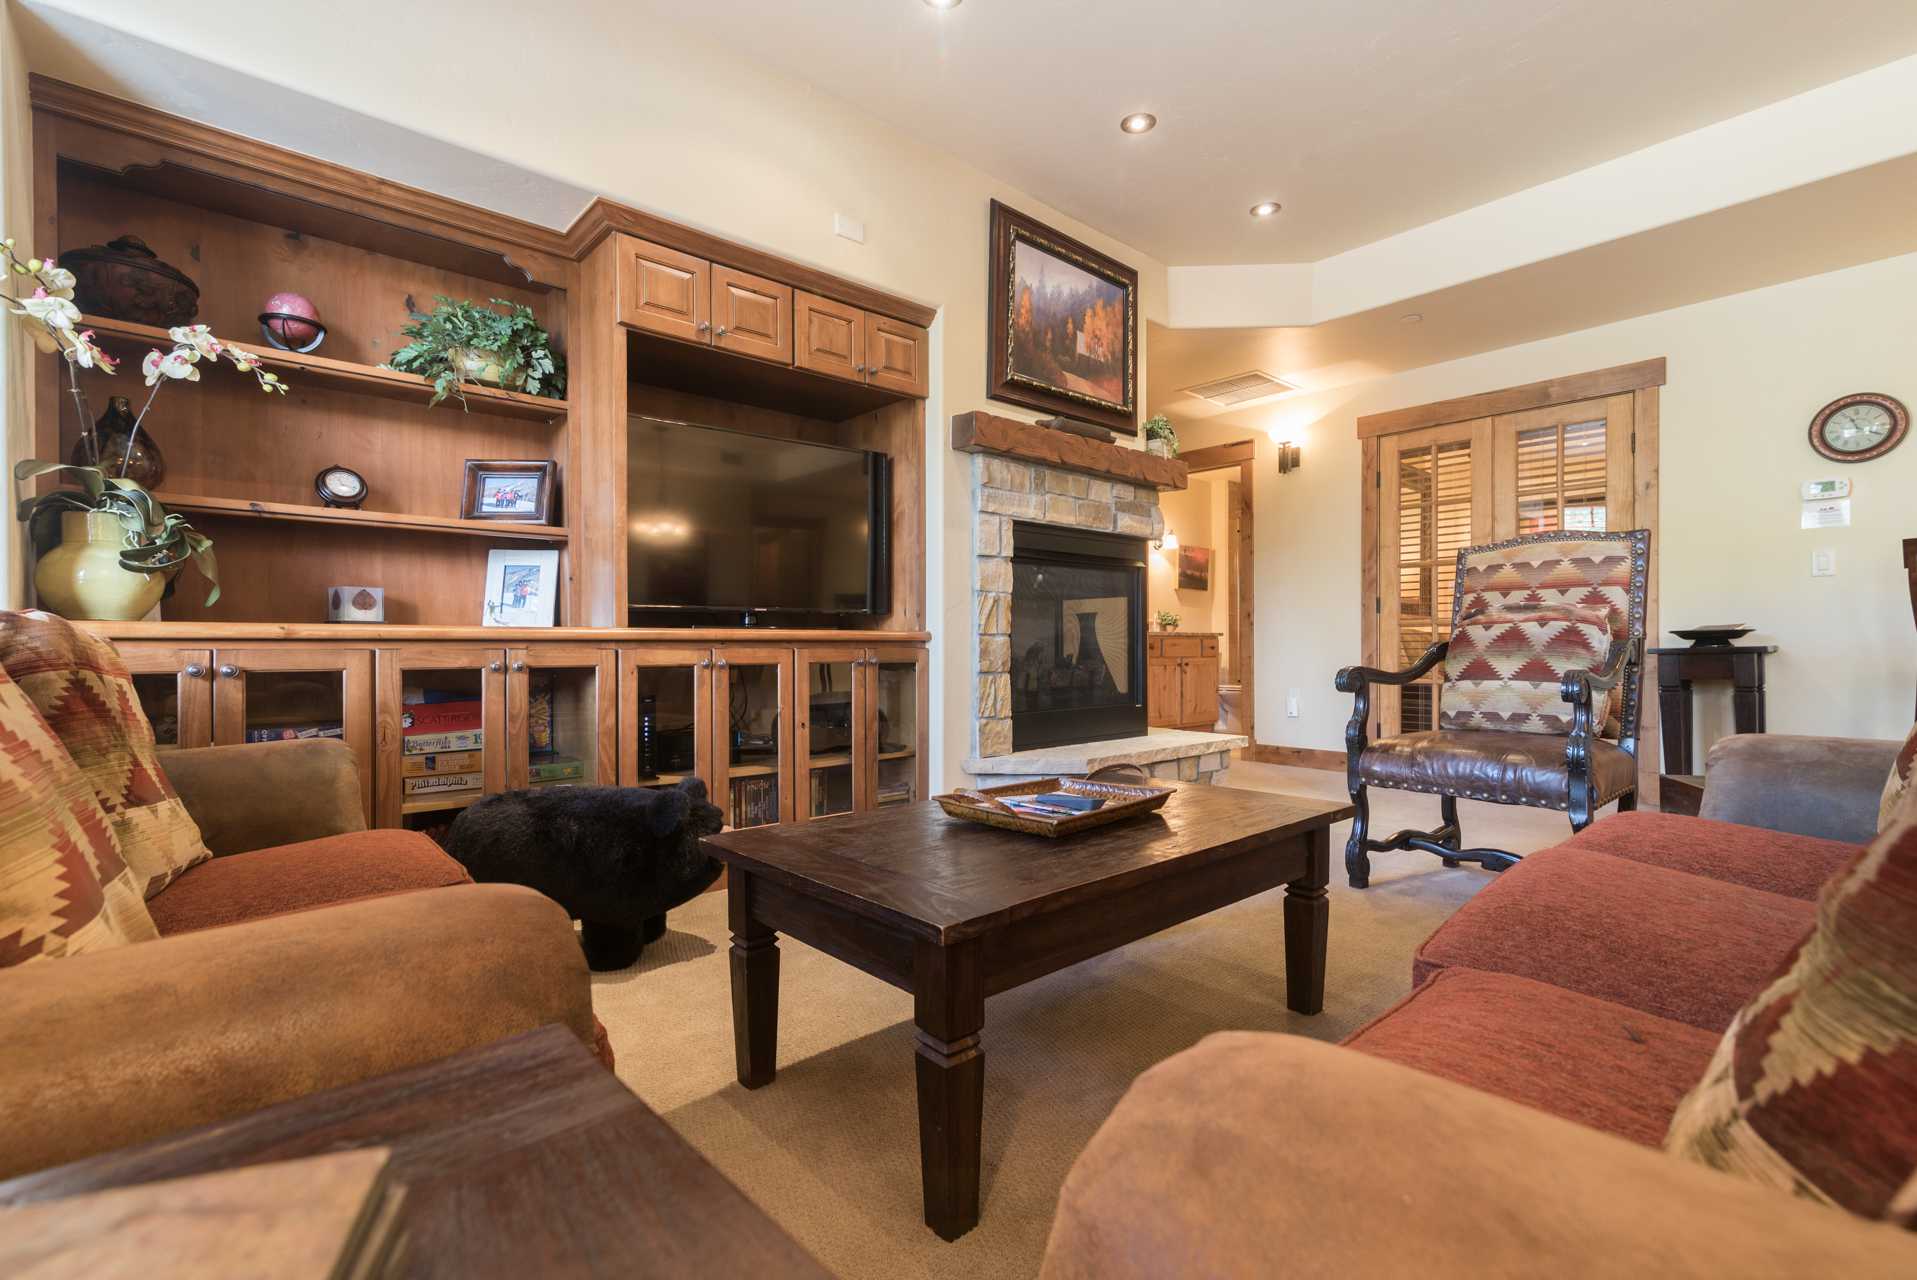 EL5112 Private Patio with Hot Tub, Fire Place and BBQ! Short walk to the slopes!